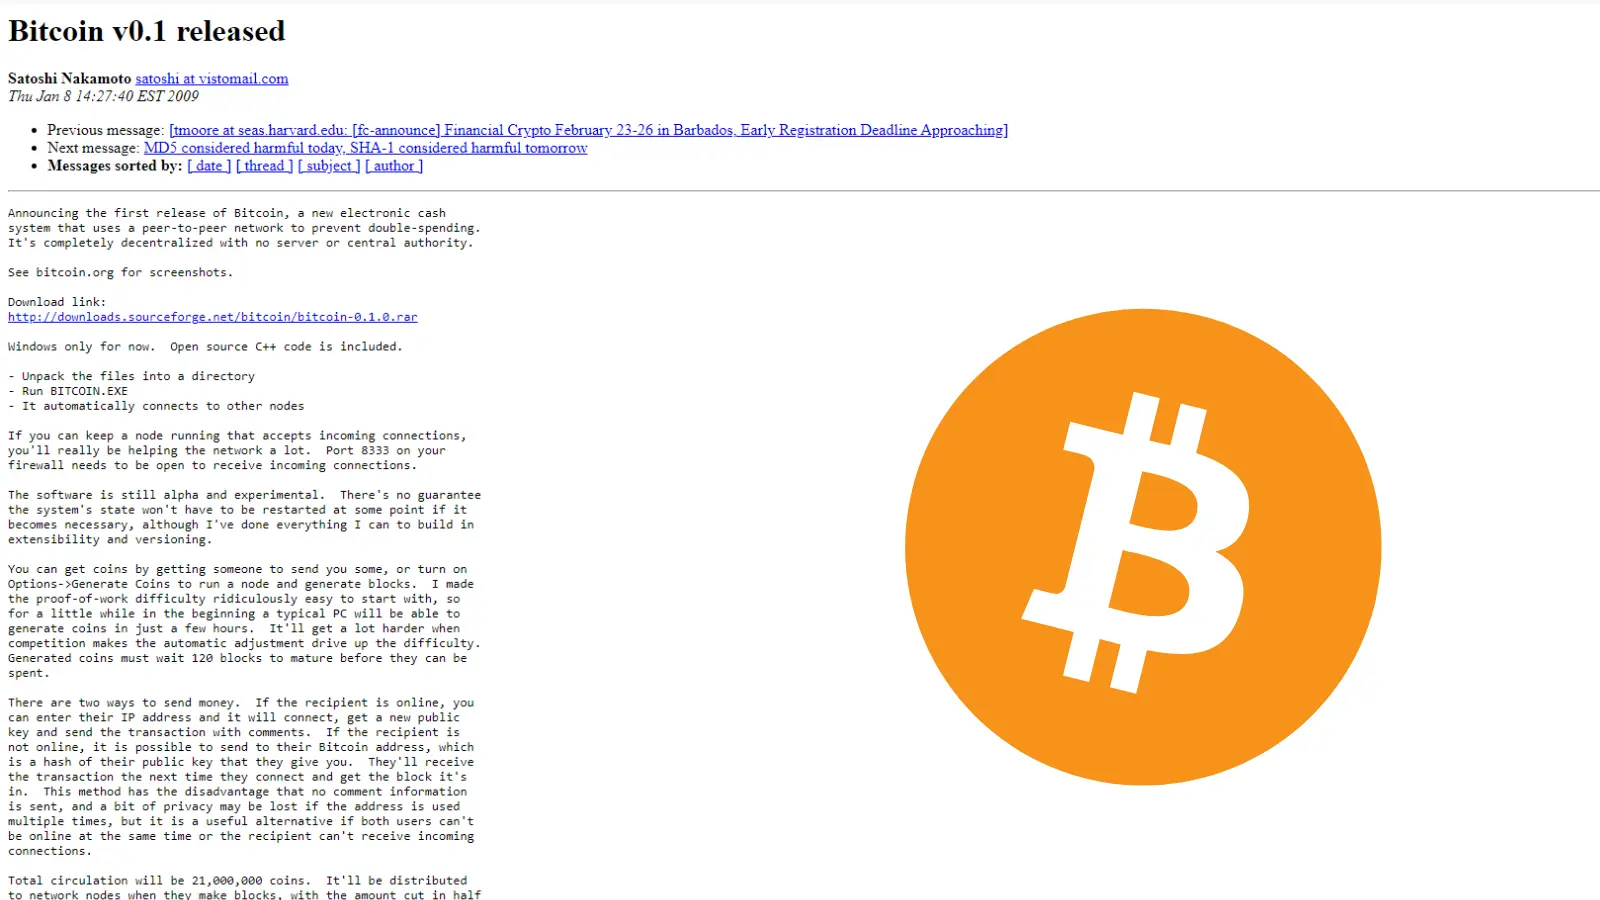 A photo of the Bitcoin event: The First Release of the Bitcoin software: Bitcoin v0.1